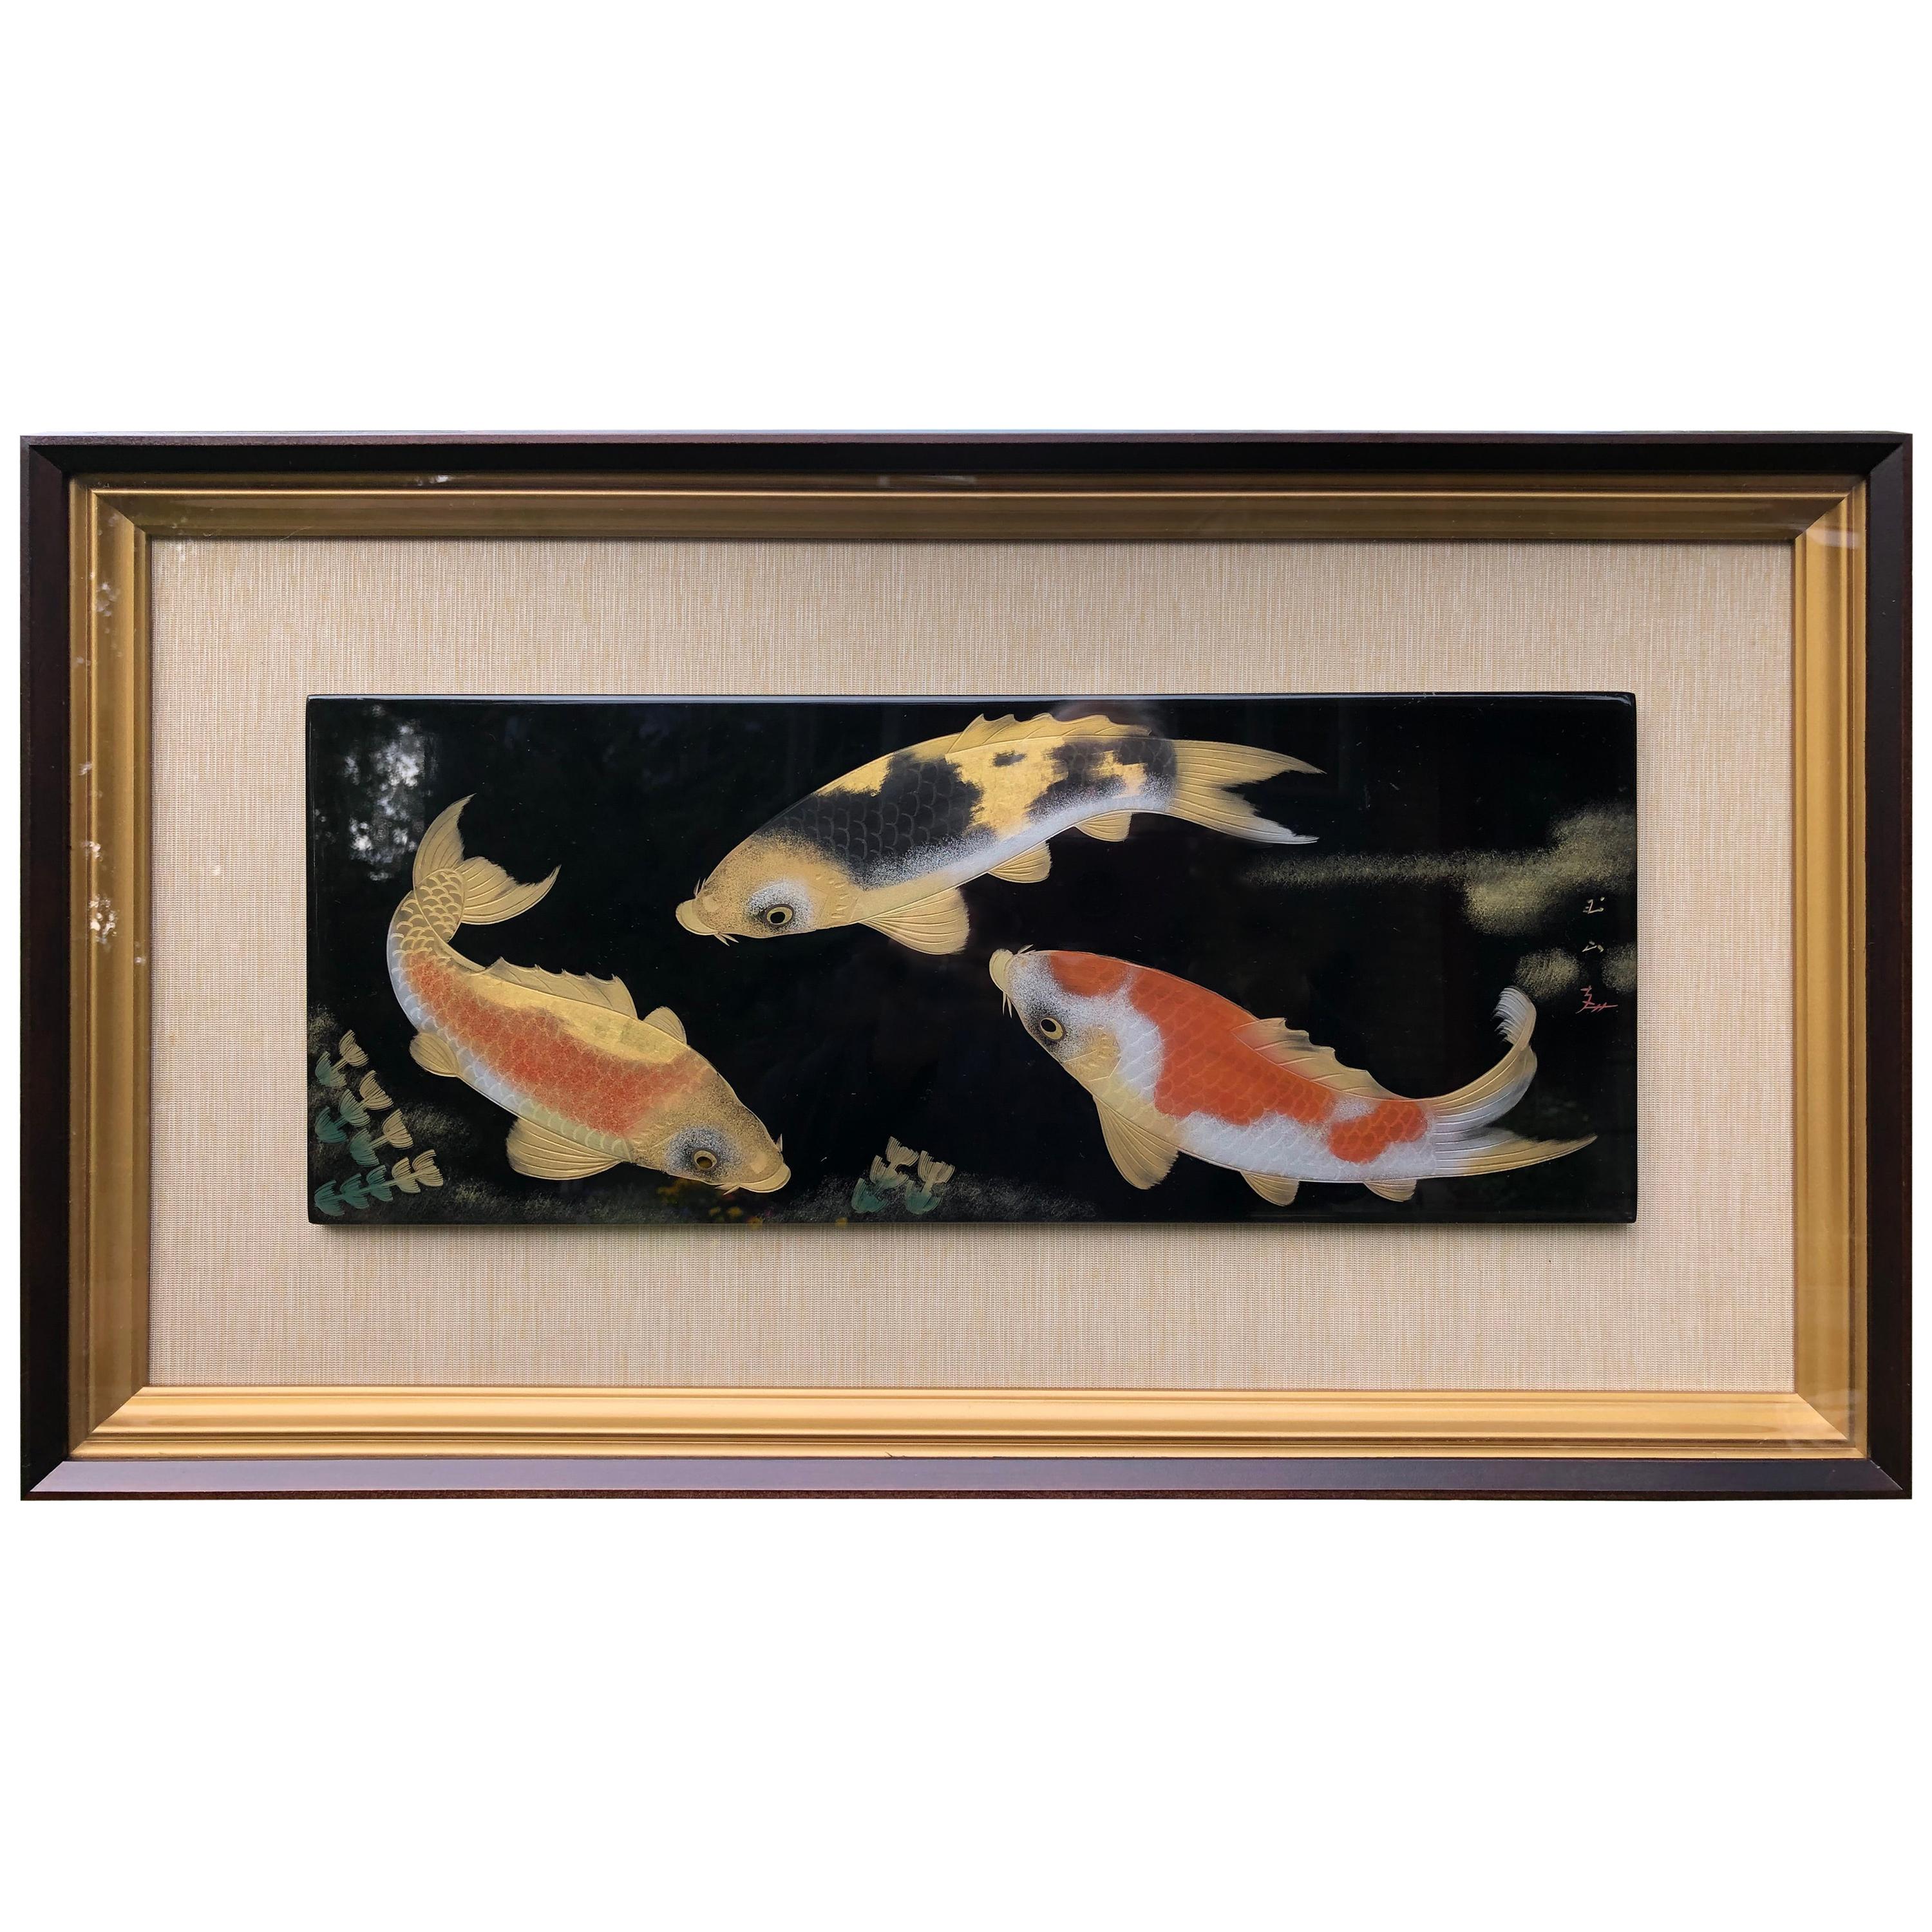 Japanese Fine Rich Black & Gold KOI Framed Lacquer Panel Signed Collectors Dream